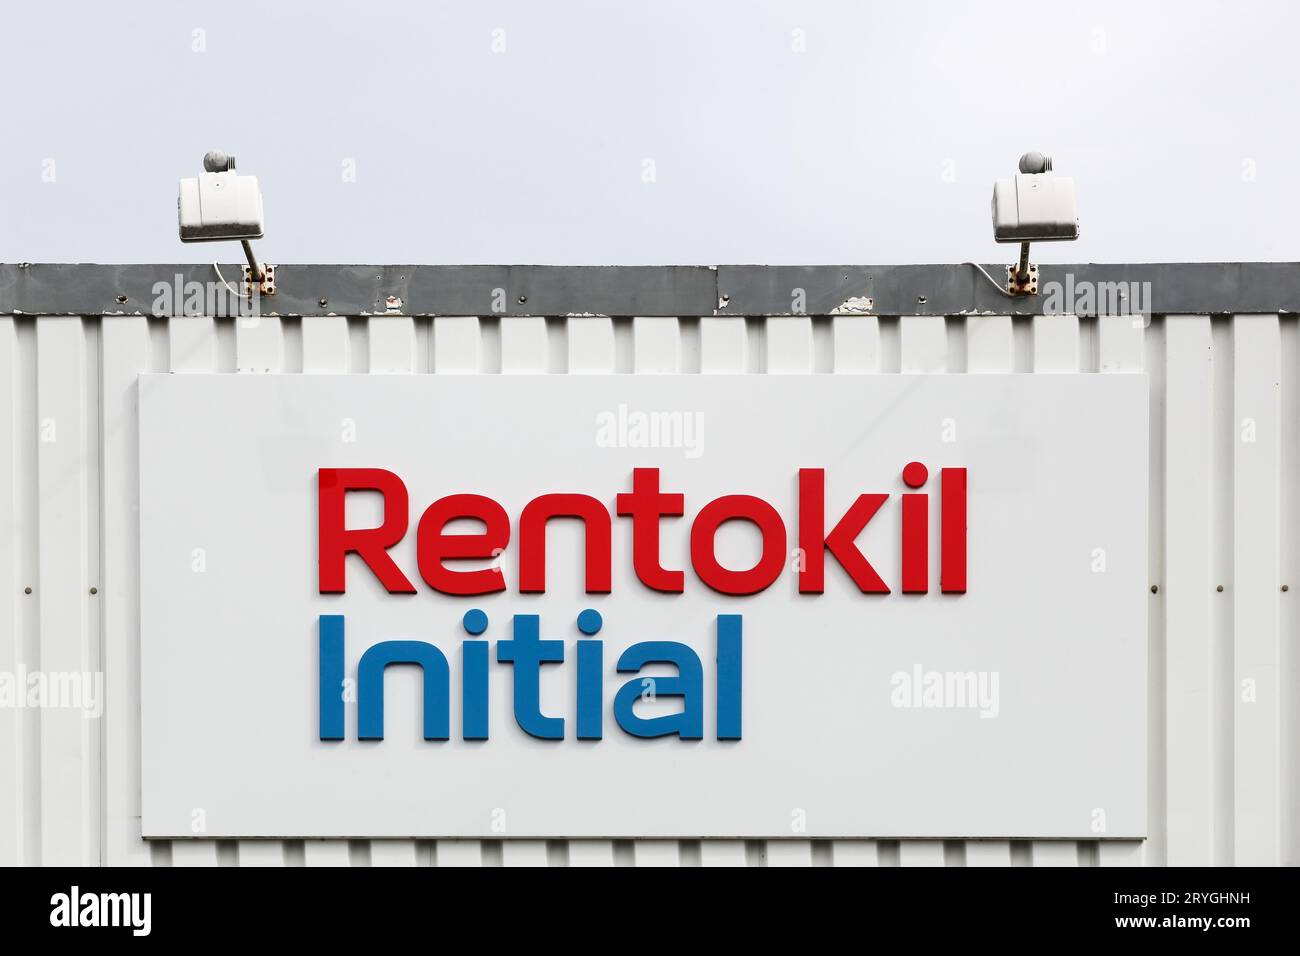 Rentokil Initial logo on a wall. Rentokil Initial is a British business services group and specialized in hygiene services for companies Stock Photo